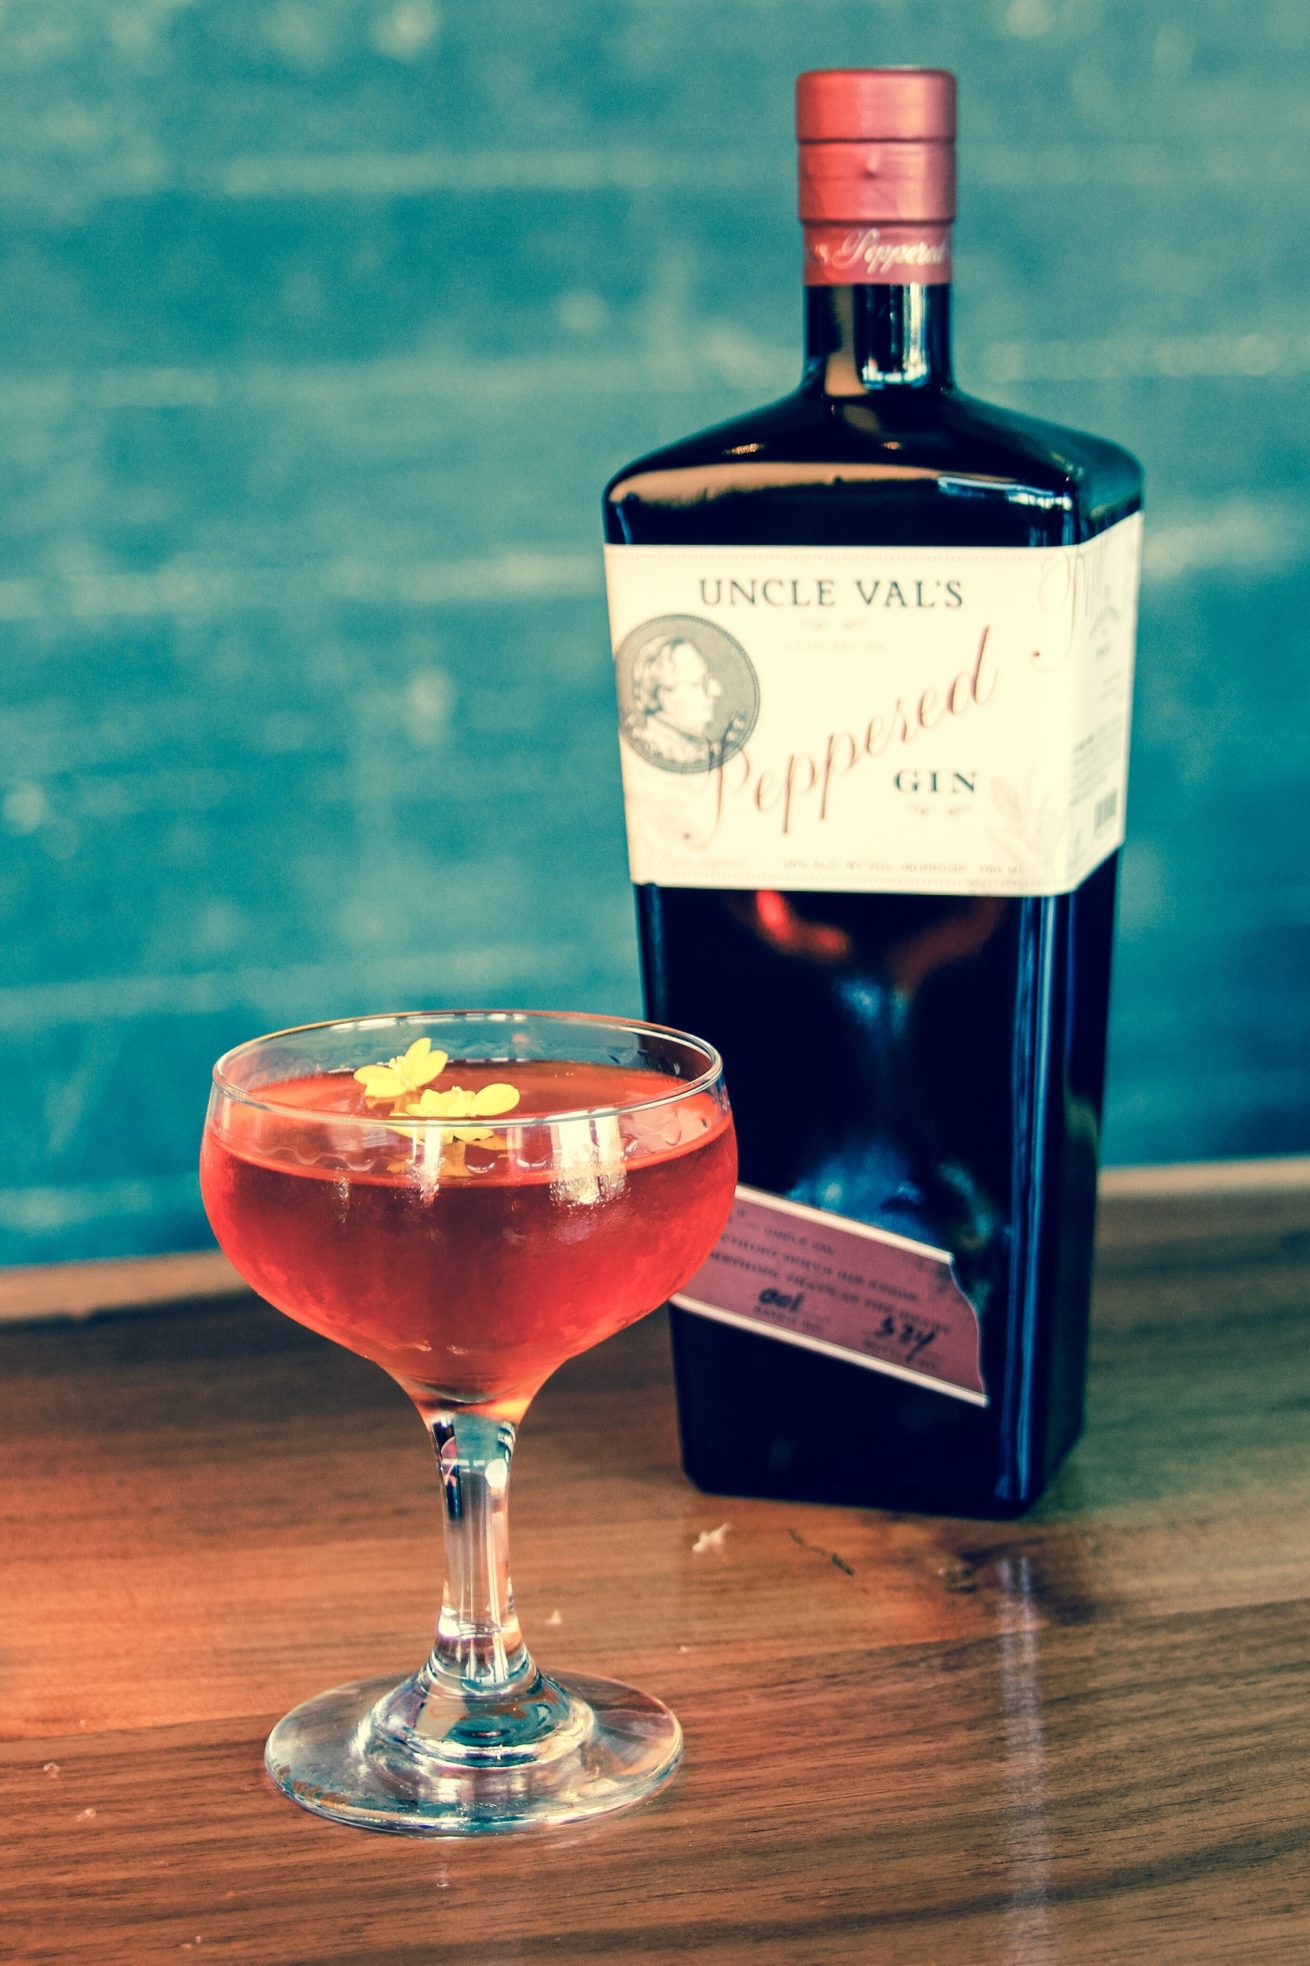 Lady in Red Cocktail using Uncle Val's Peppered Gin